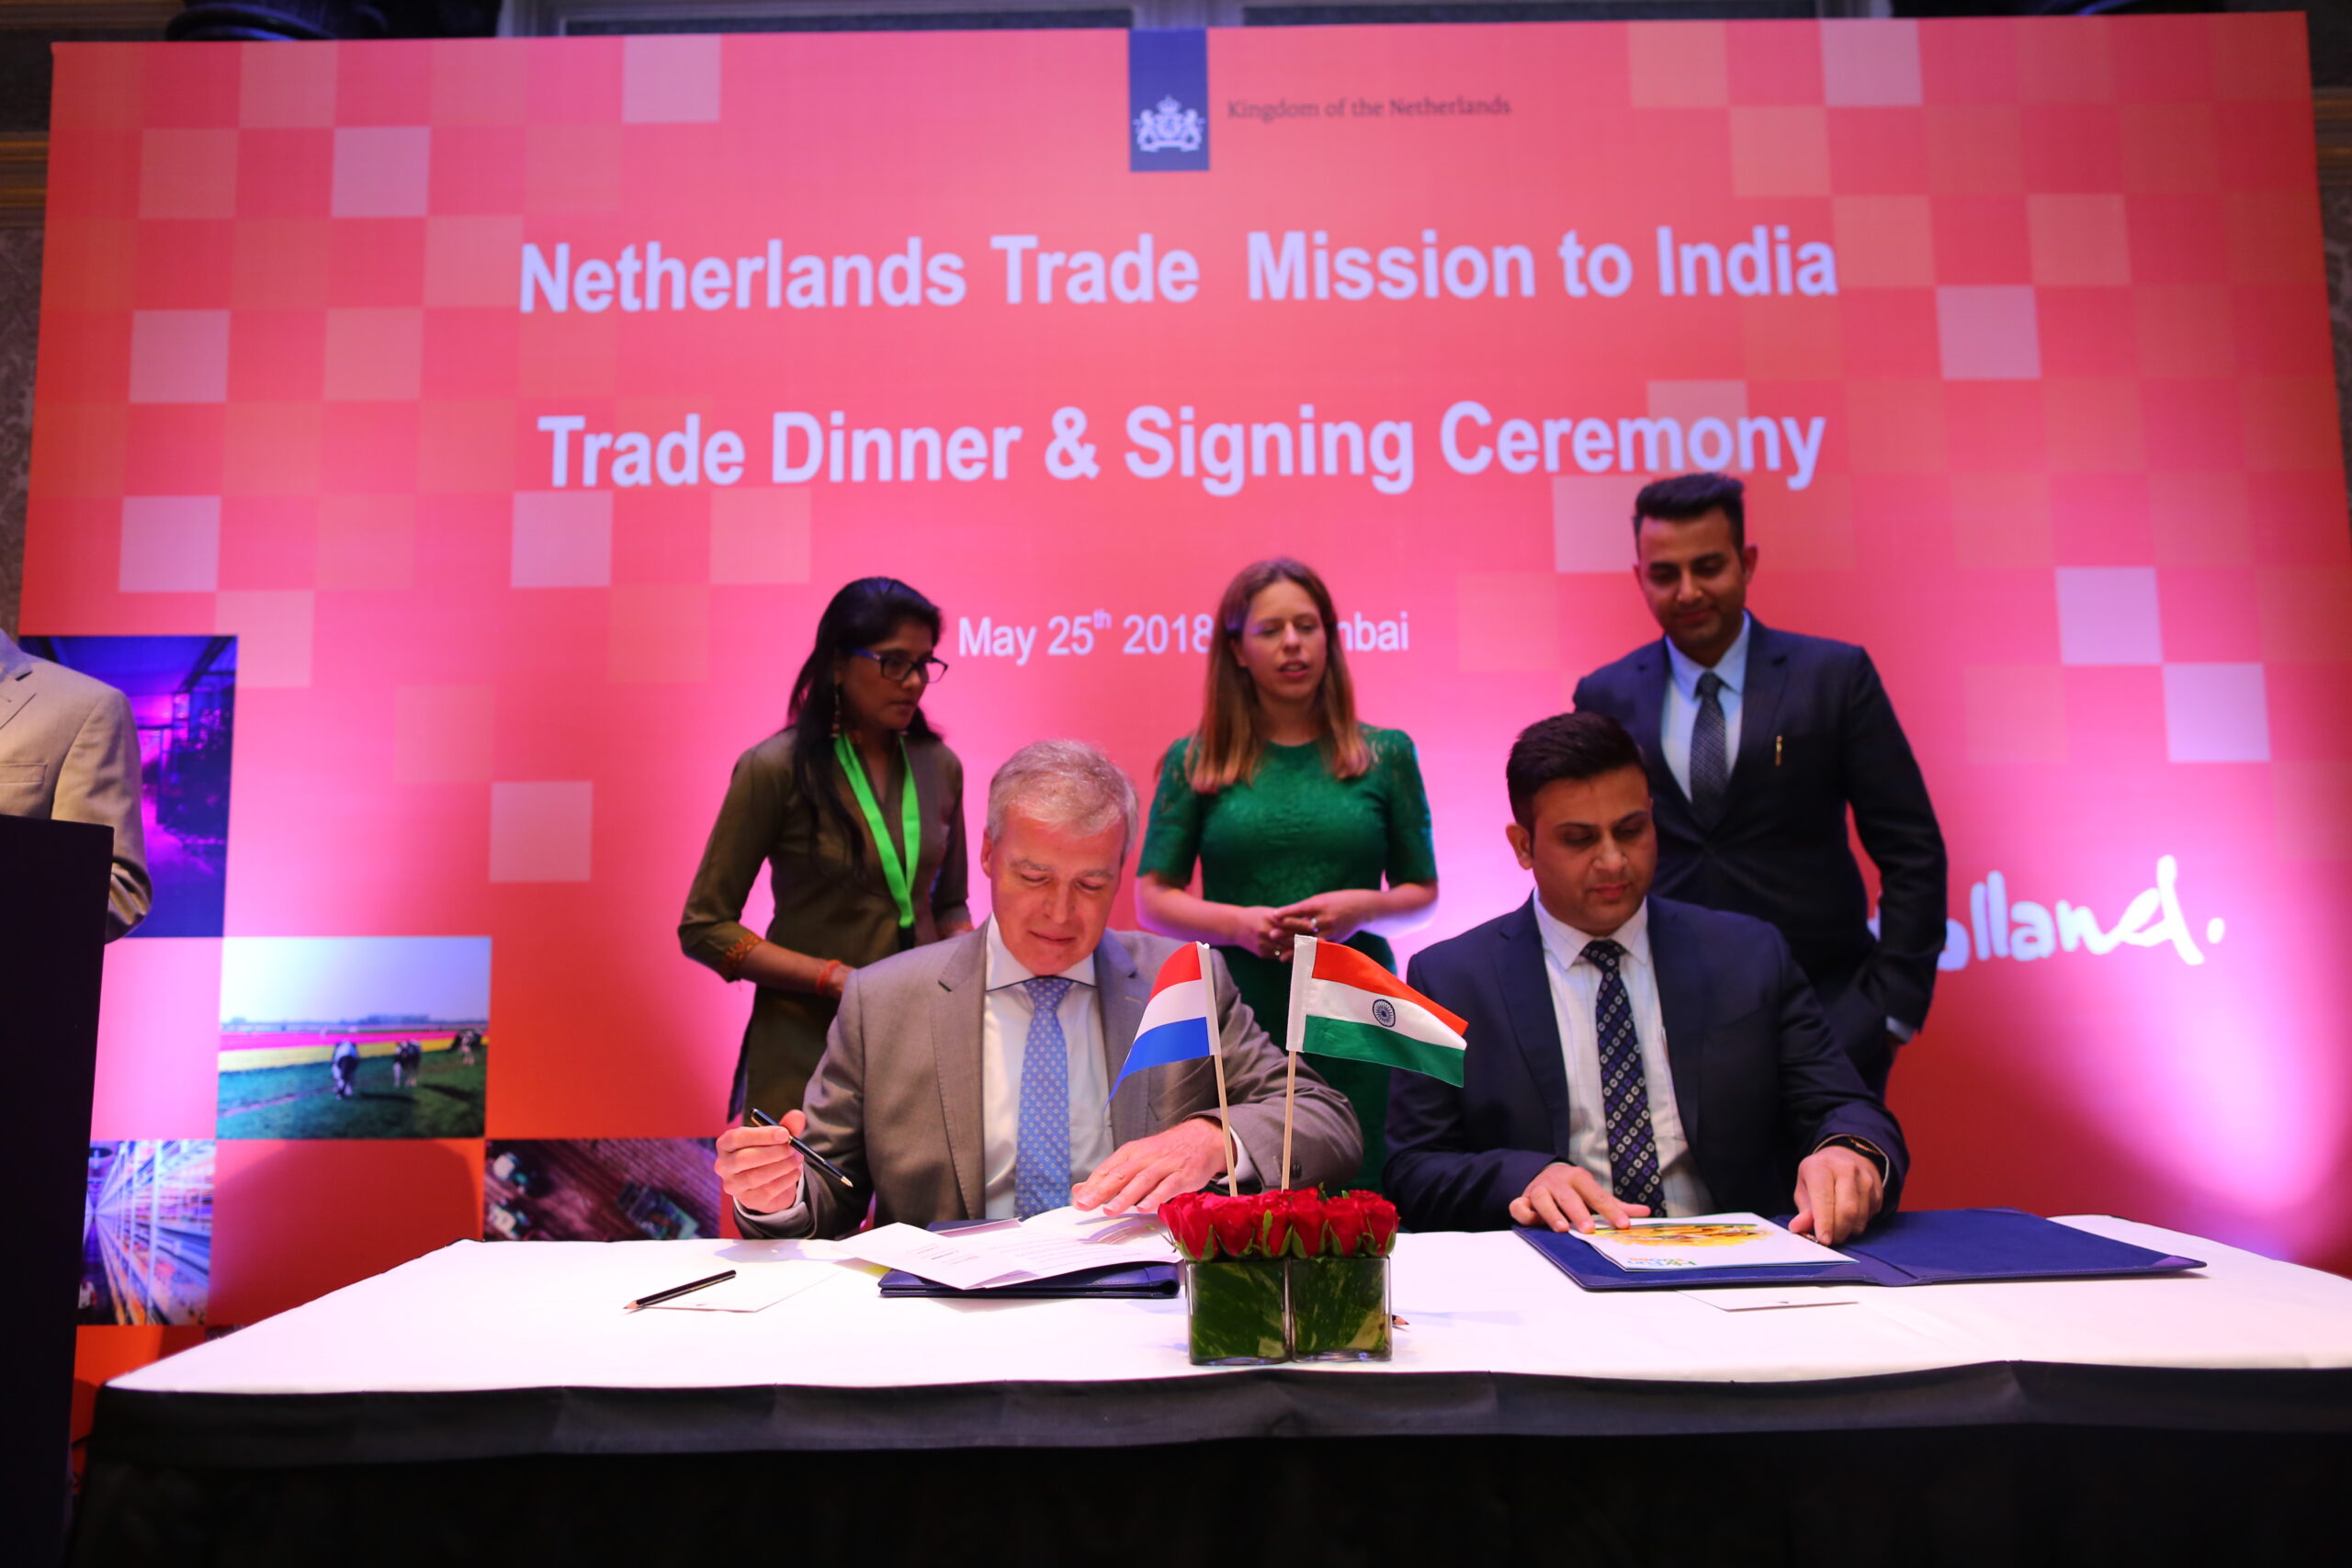 Director of Kiremko, Paul Oosterlaken, signs an agreement together with a customer from India, in the company of the then Minister of Agriculture of the Kingdom of the Netherlands